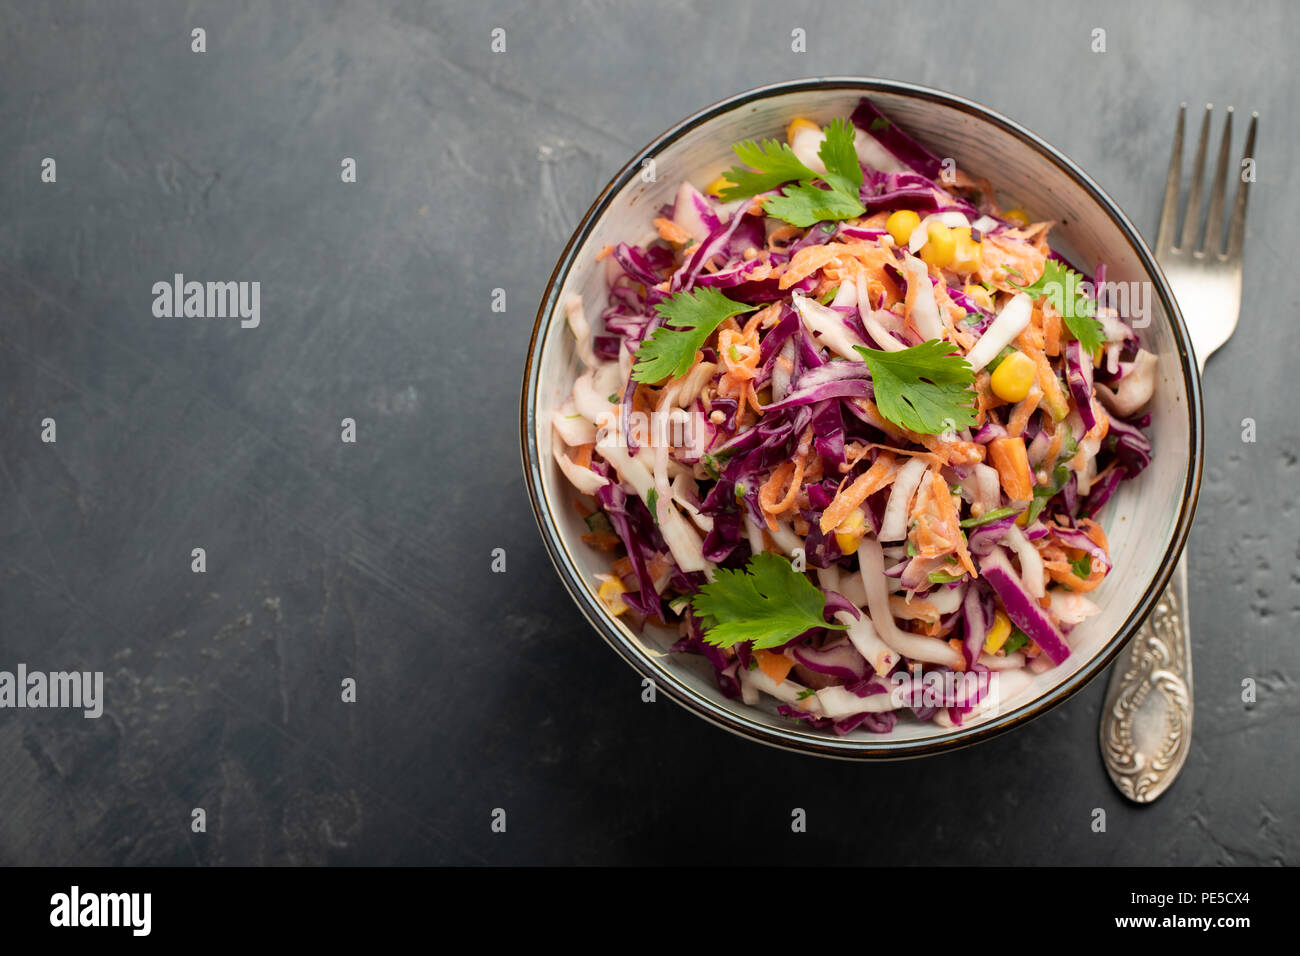 Purple cabbage and carrot salad with mayonnaise in a white bowl on a black background. Classic coleslaw. Diet vegetarian dish. Top view with copy space Stock Photo